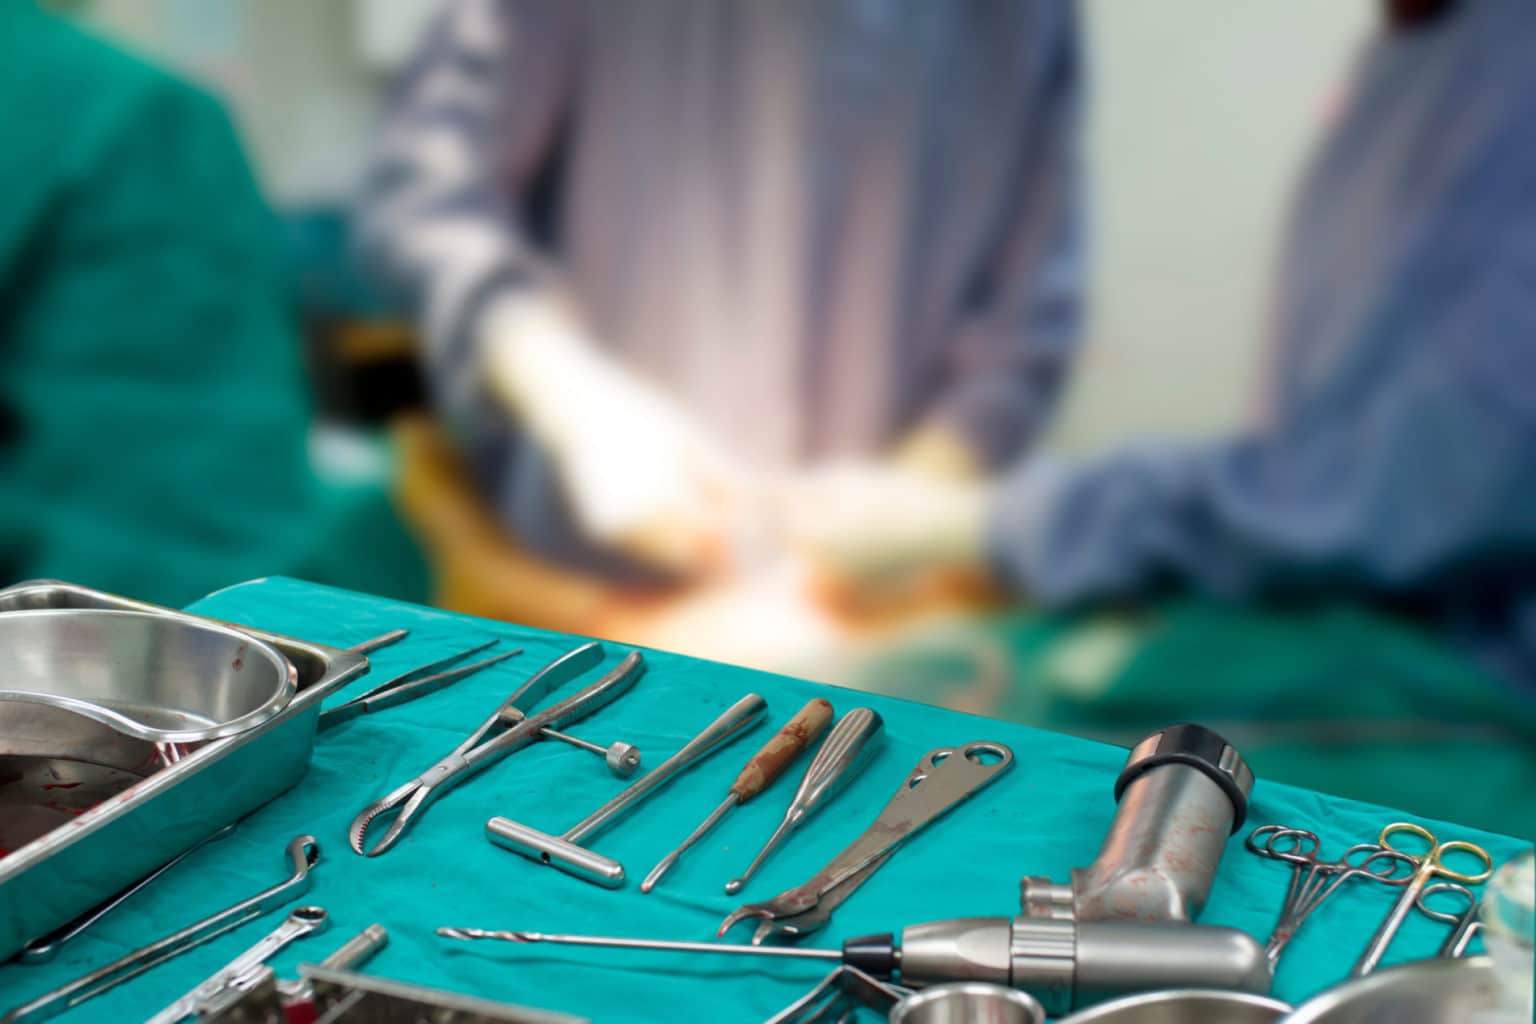 Tool, for Orthopedic surgery, On a blurred background of surgeon team.